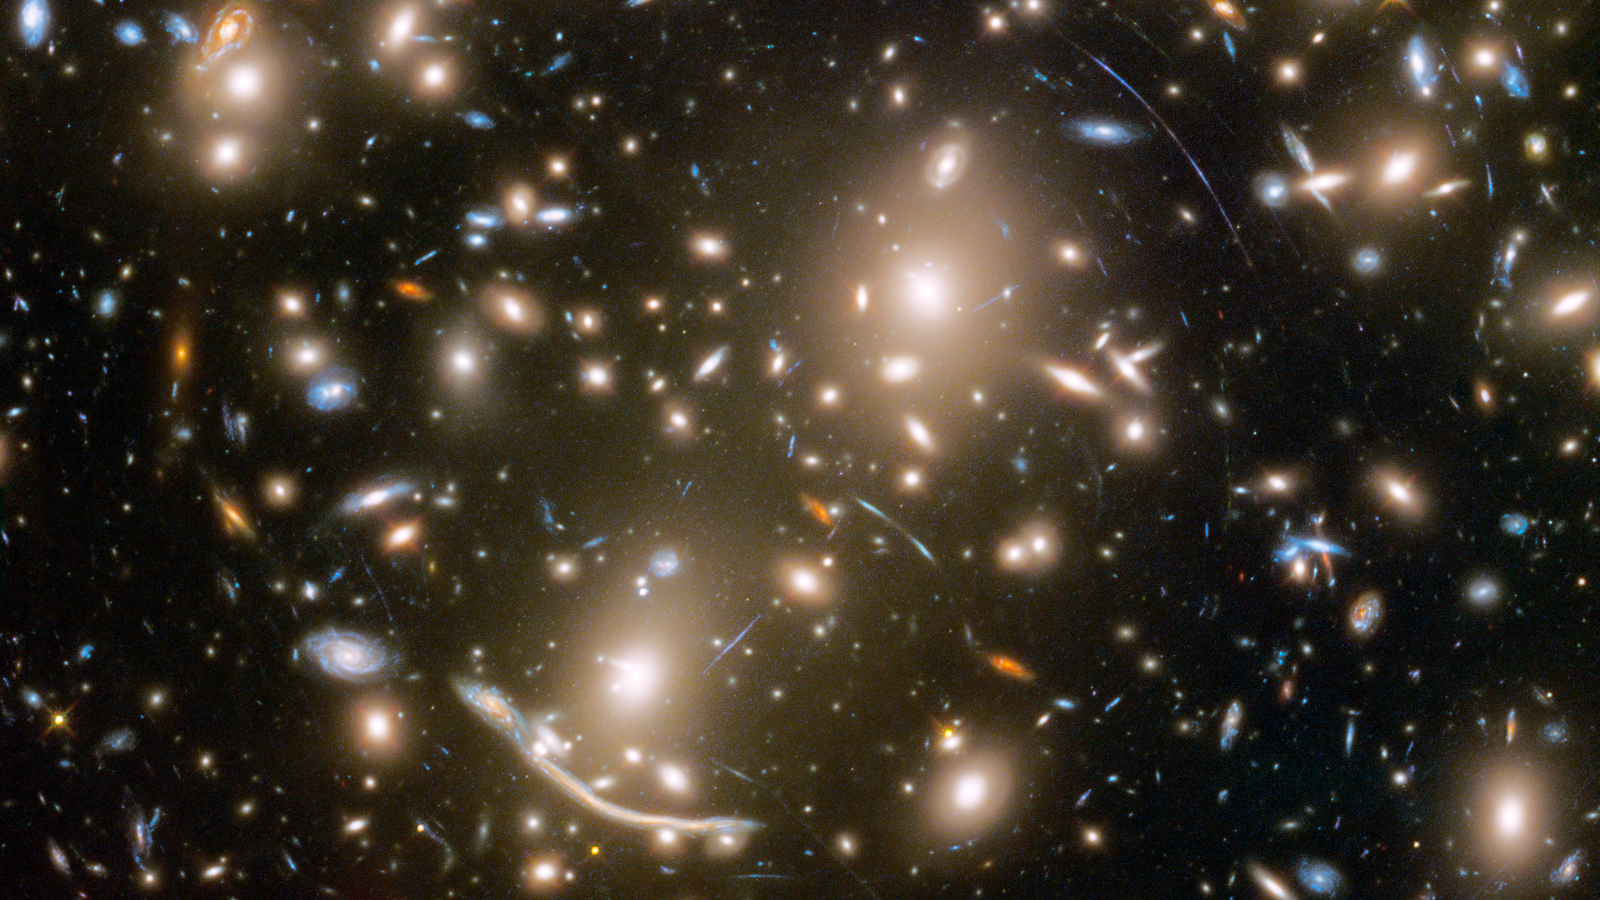 How Many Galaxies Can You Count in This Picture? - The Atlantic